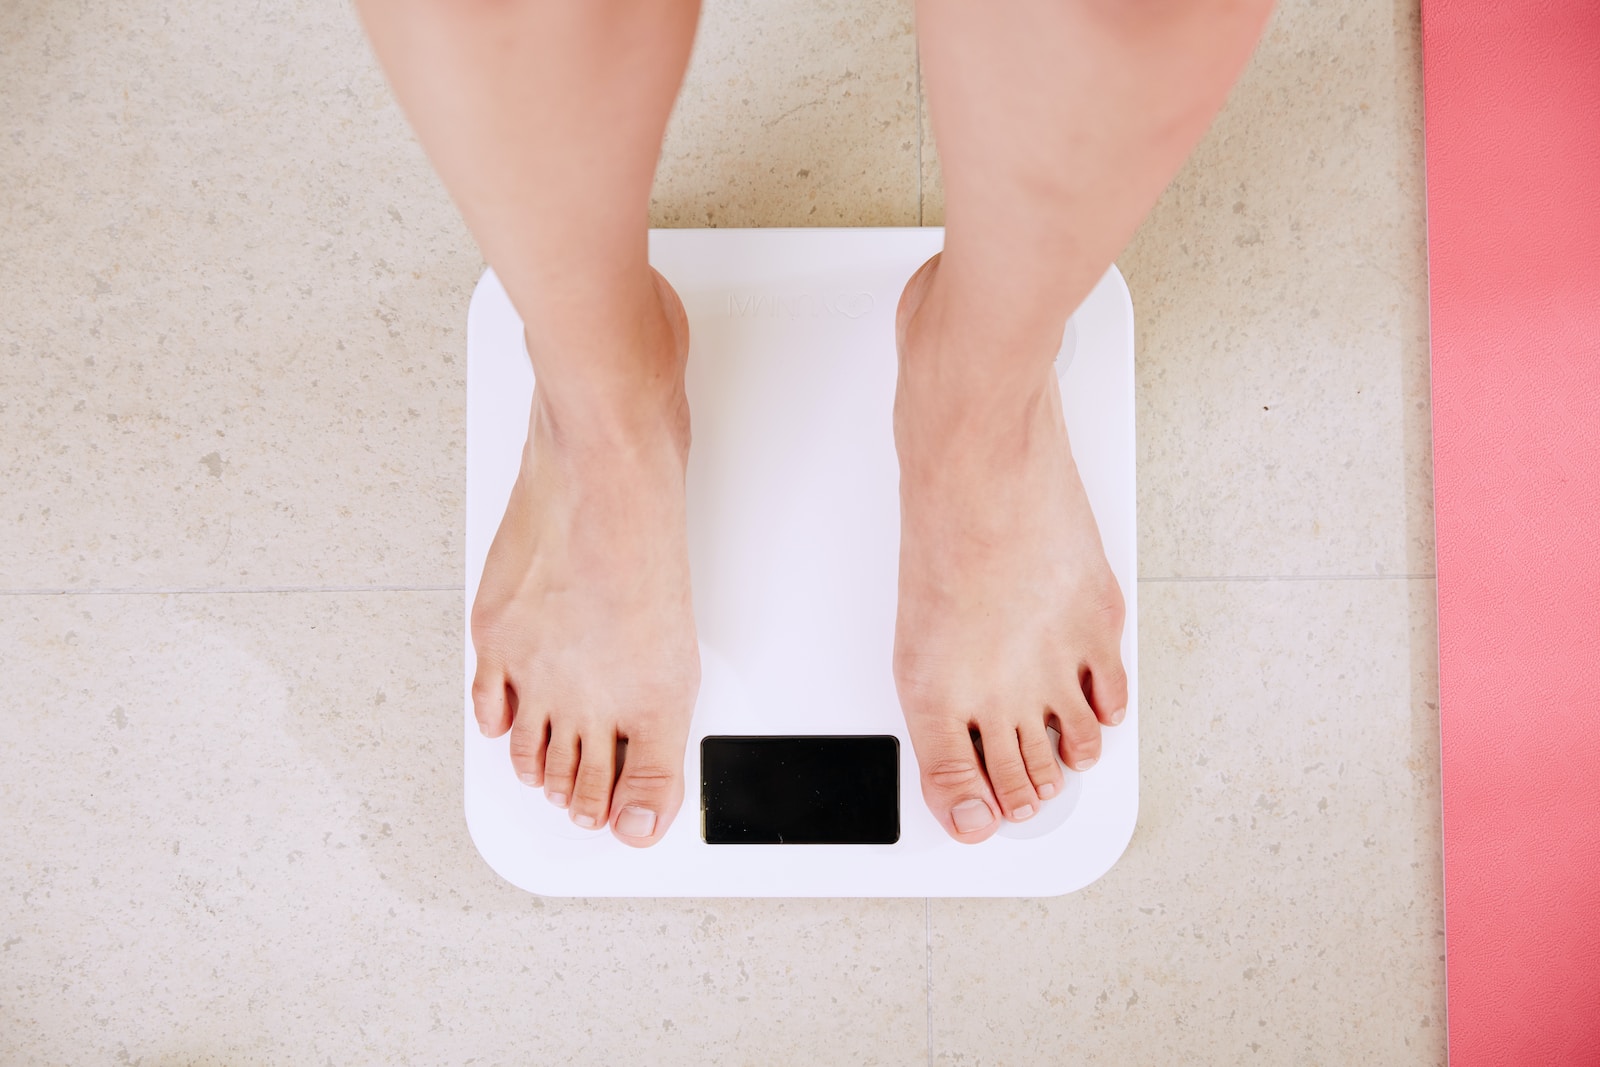 person monitoring weight loss on bathroom scale